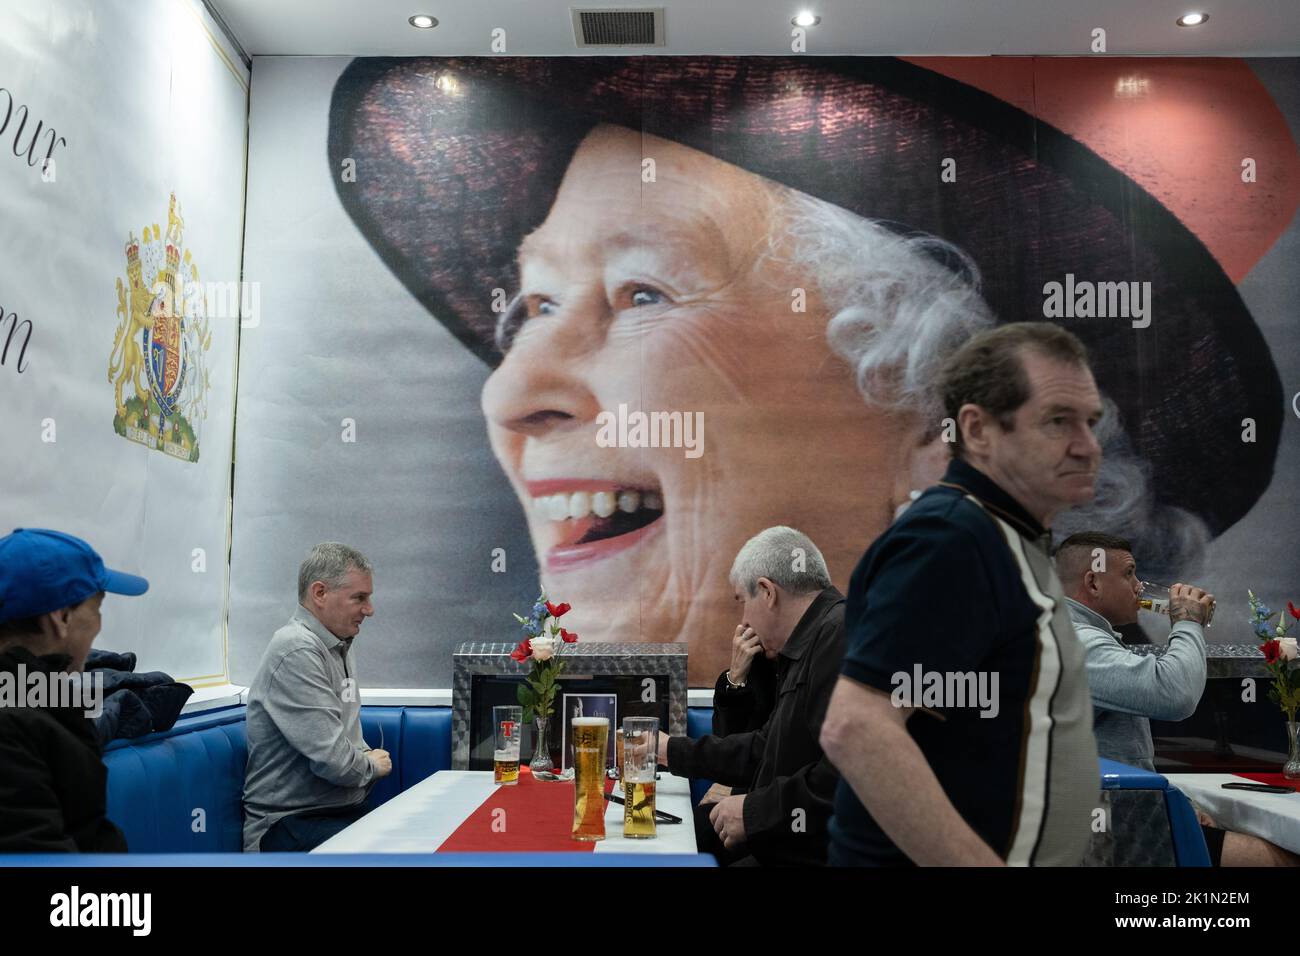 Glasgow, Scotland, 19 September 2022. Glaswegians drink in the Rangers FC supporters’ Bristol Bar, which for two days has called itself the Queen Elizabeth Arms, while watching the funeral of Her Majesty Queen Elizabeth II who died on 8th September, in Glasgow, Scotland, 19 September 2022. Photo credit: Jeremy Sutton-Hibbert/Alamy Live News. Stock Photo